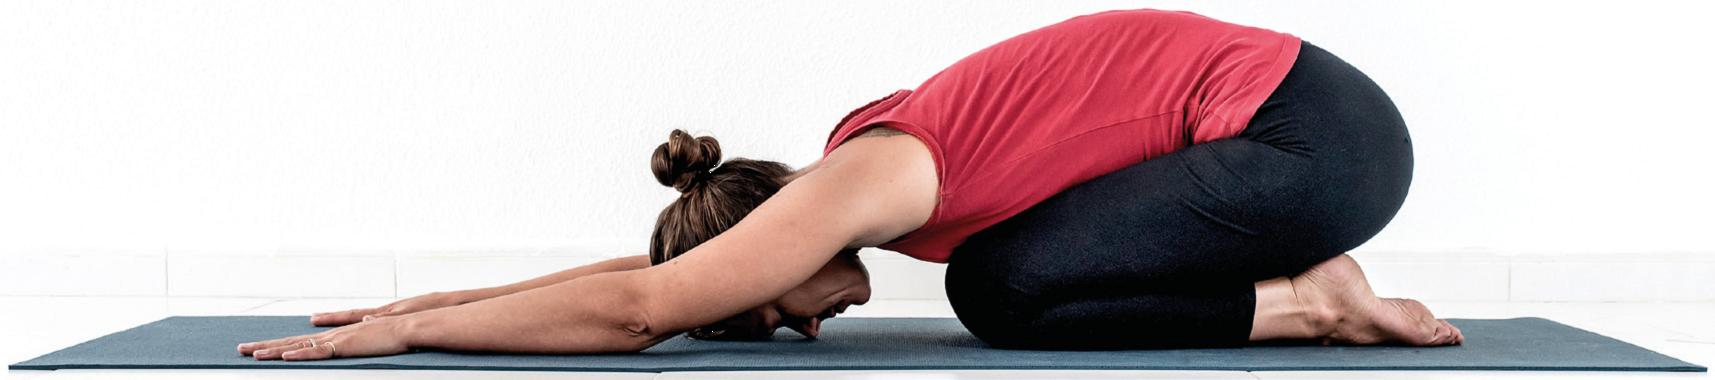 4 Yoga Moves You Need To Try To Combat Back Pain 